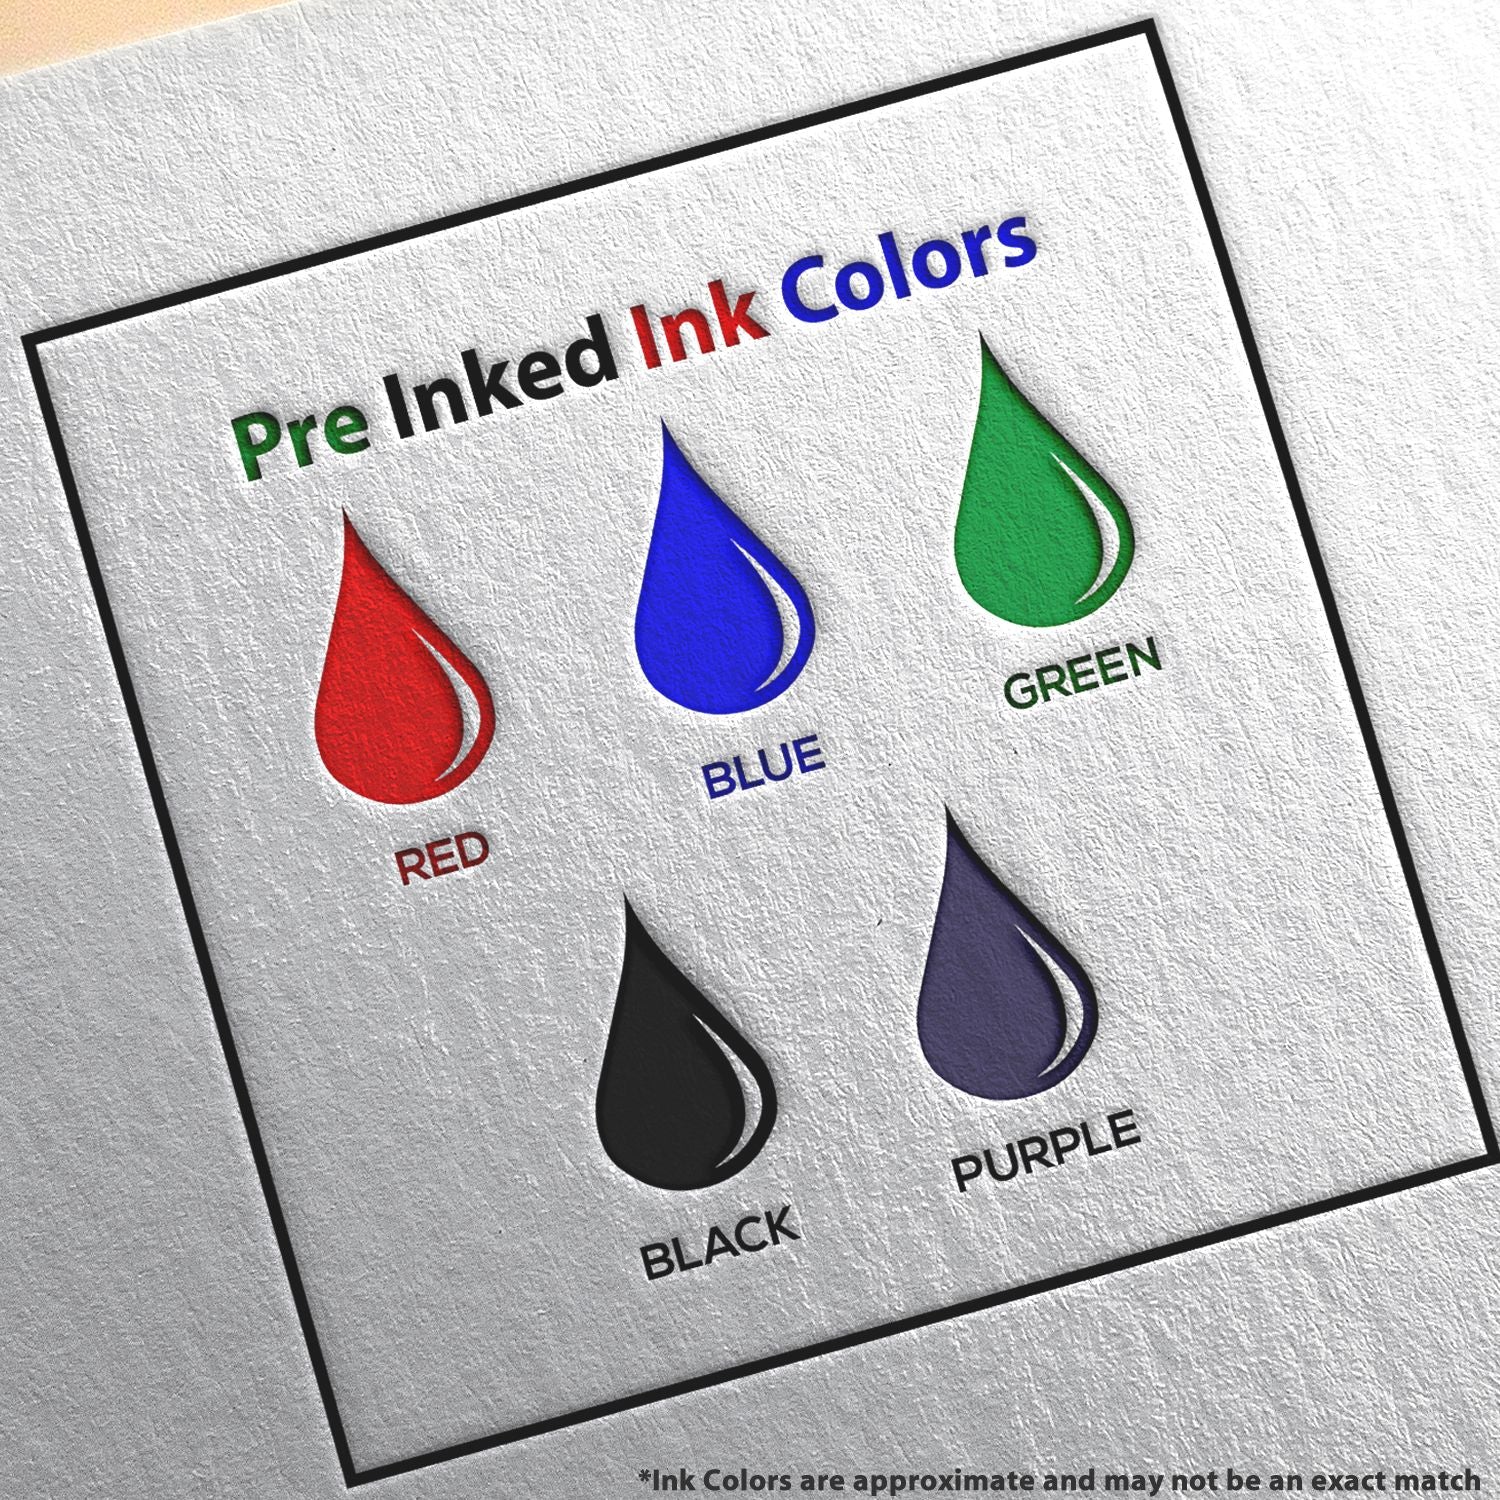 A picture showing the different ink colors or hues available for the Premium MaxLight Pre-Inked Michigan Landscape Architectural Stamp product.